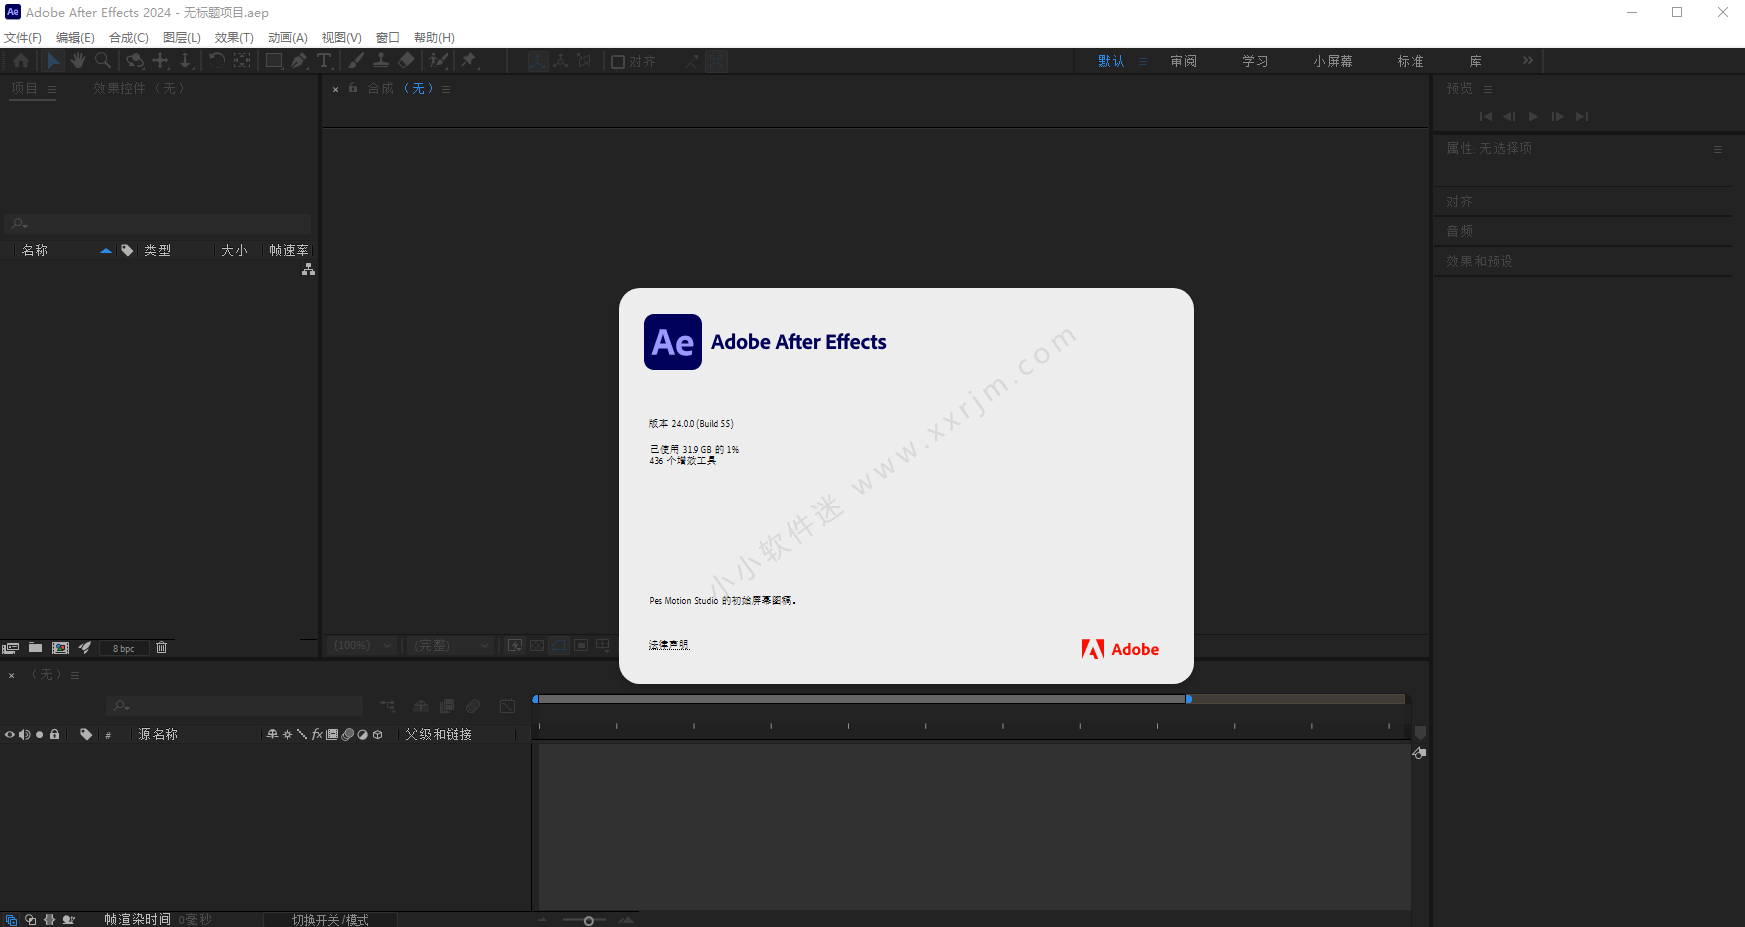 Adobe After Effects 2024 v24.0.0.55 download the new version for apple